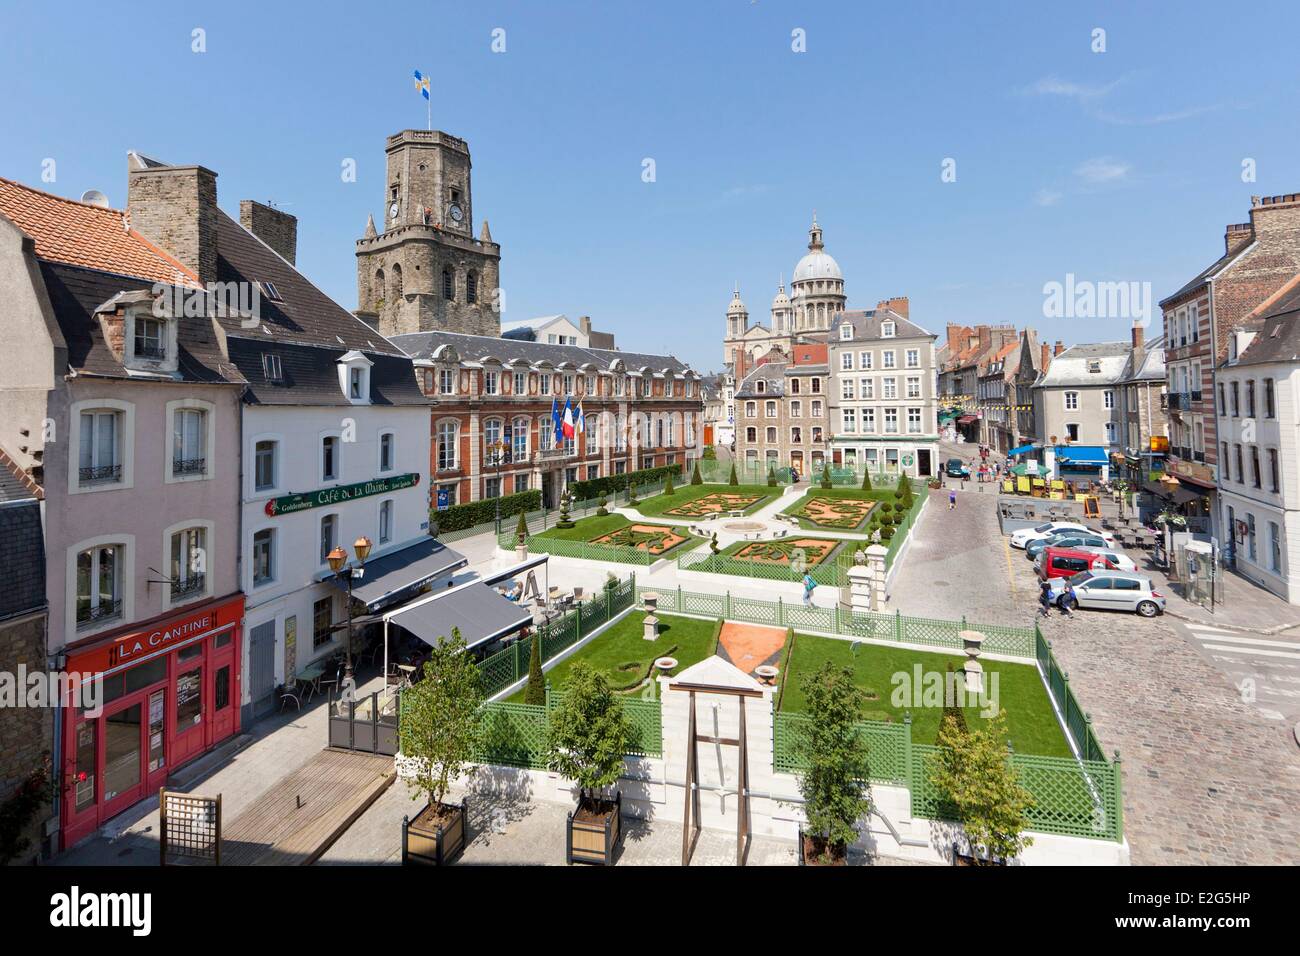 Le Jardin Ephemere Boulogne Sur Mer 2020 All You Need To Know Before You Go With Photos Tripadvisor